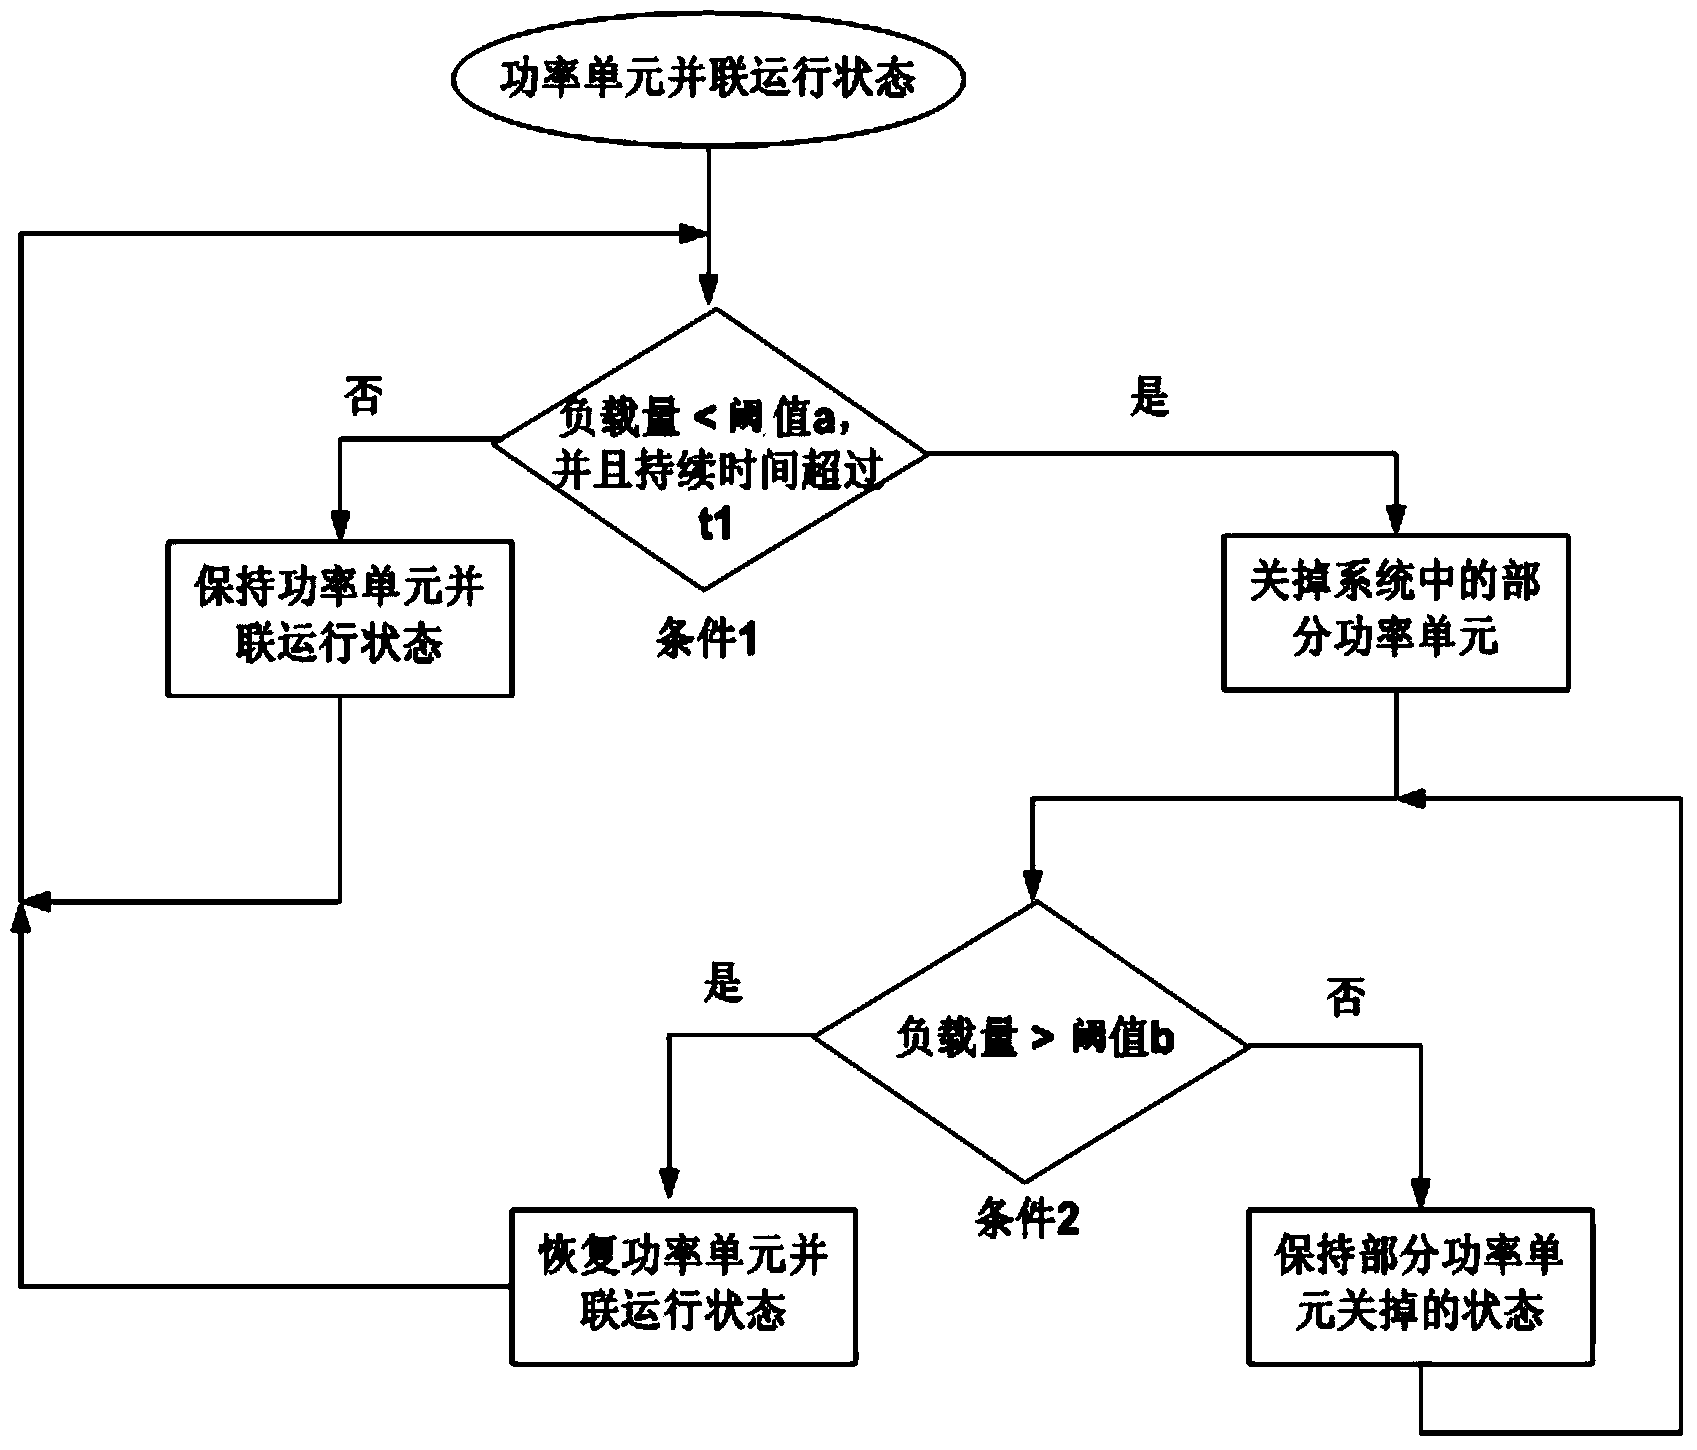 Control method for promoting light load of UPS (Uninterrupted Power Supply)